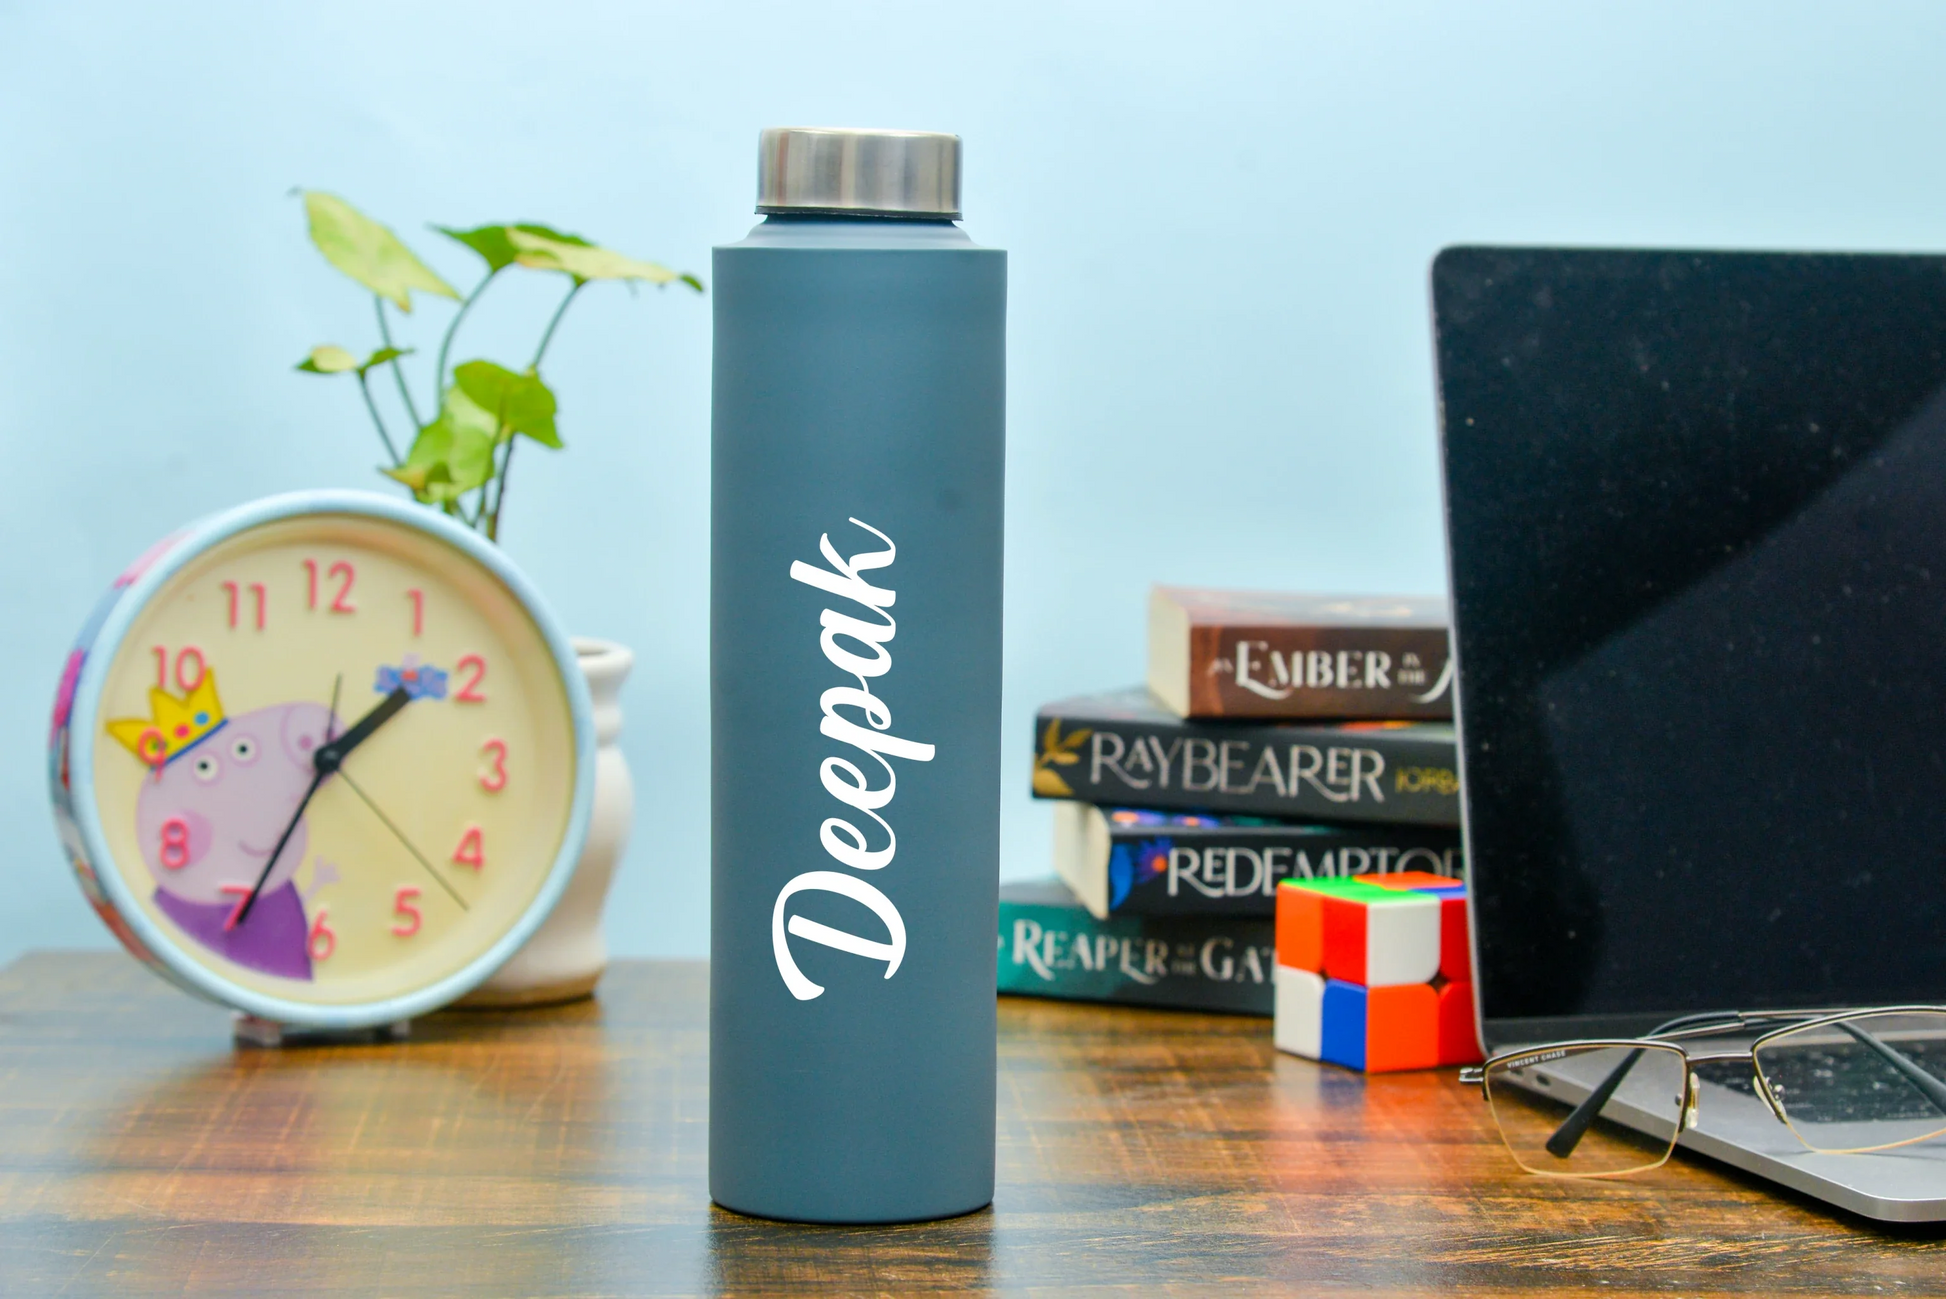 Get this black glossy personalized bottle made from high quality stainless steel to carry lie juices and drinks safely